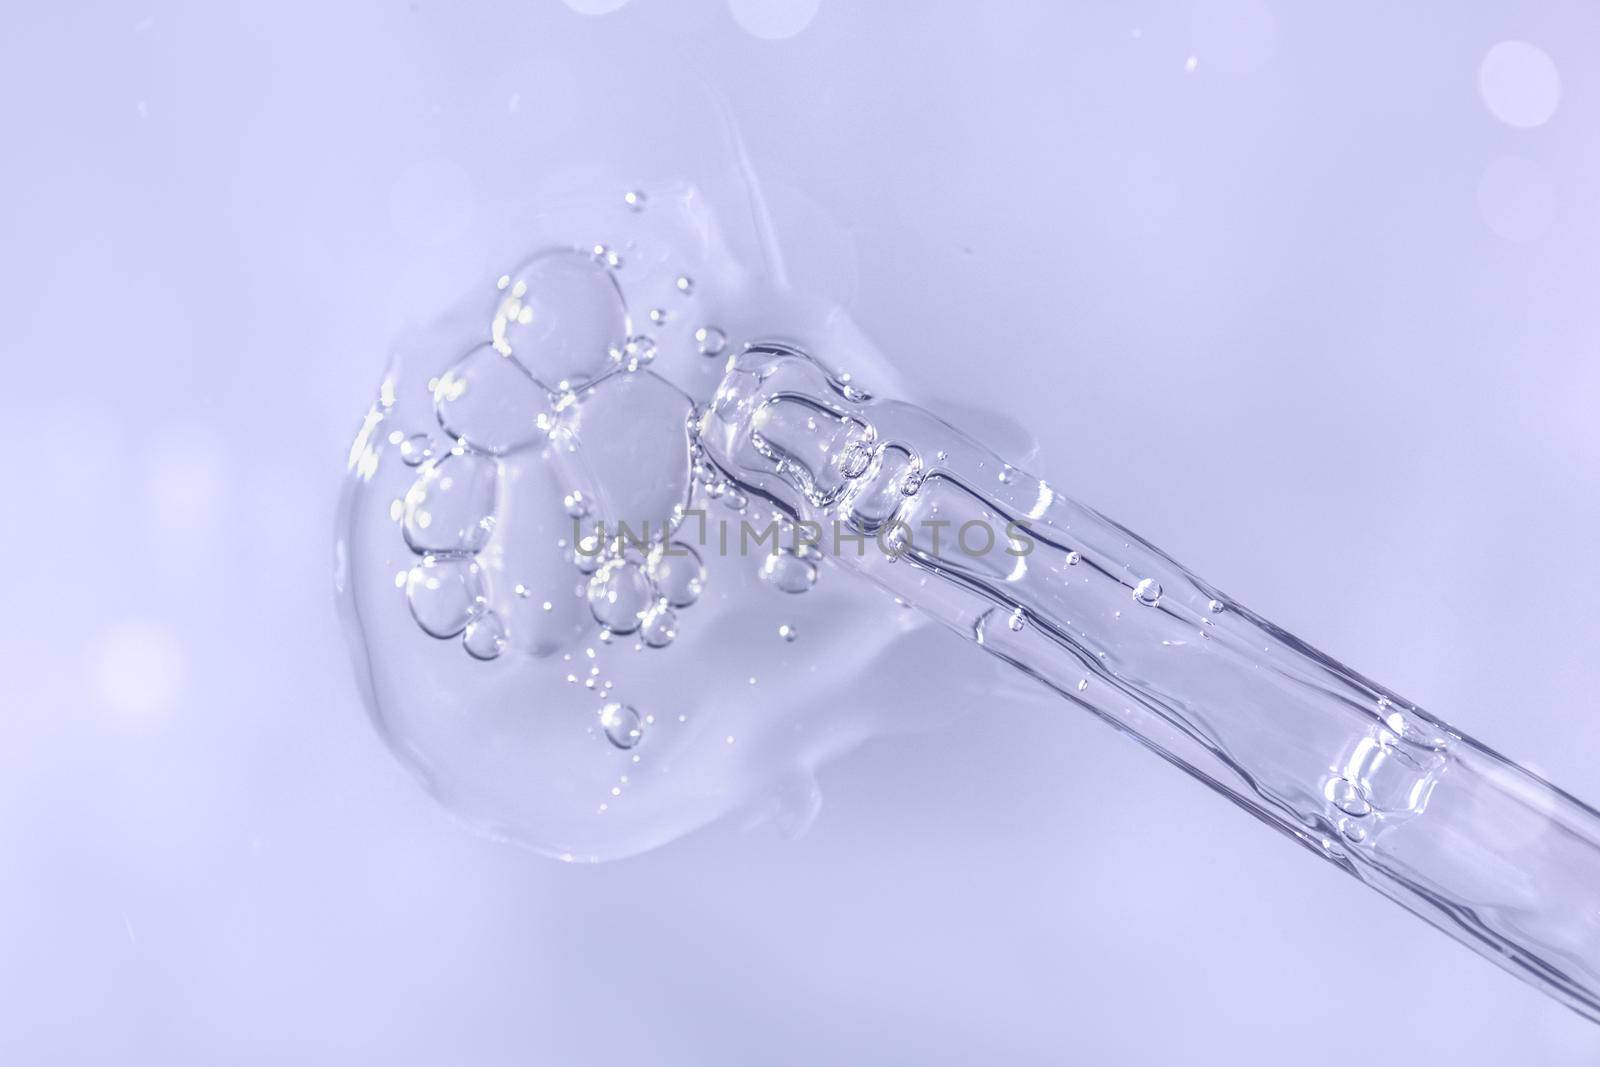 Pipette with fluid hyaluronic acid on violet background. Cosmetics and healthcare concept closeup. Dose of serum or retinol with air bubbles. Flat lay. Luxury beauty product presentation in macro